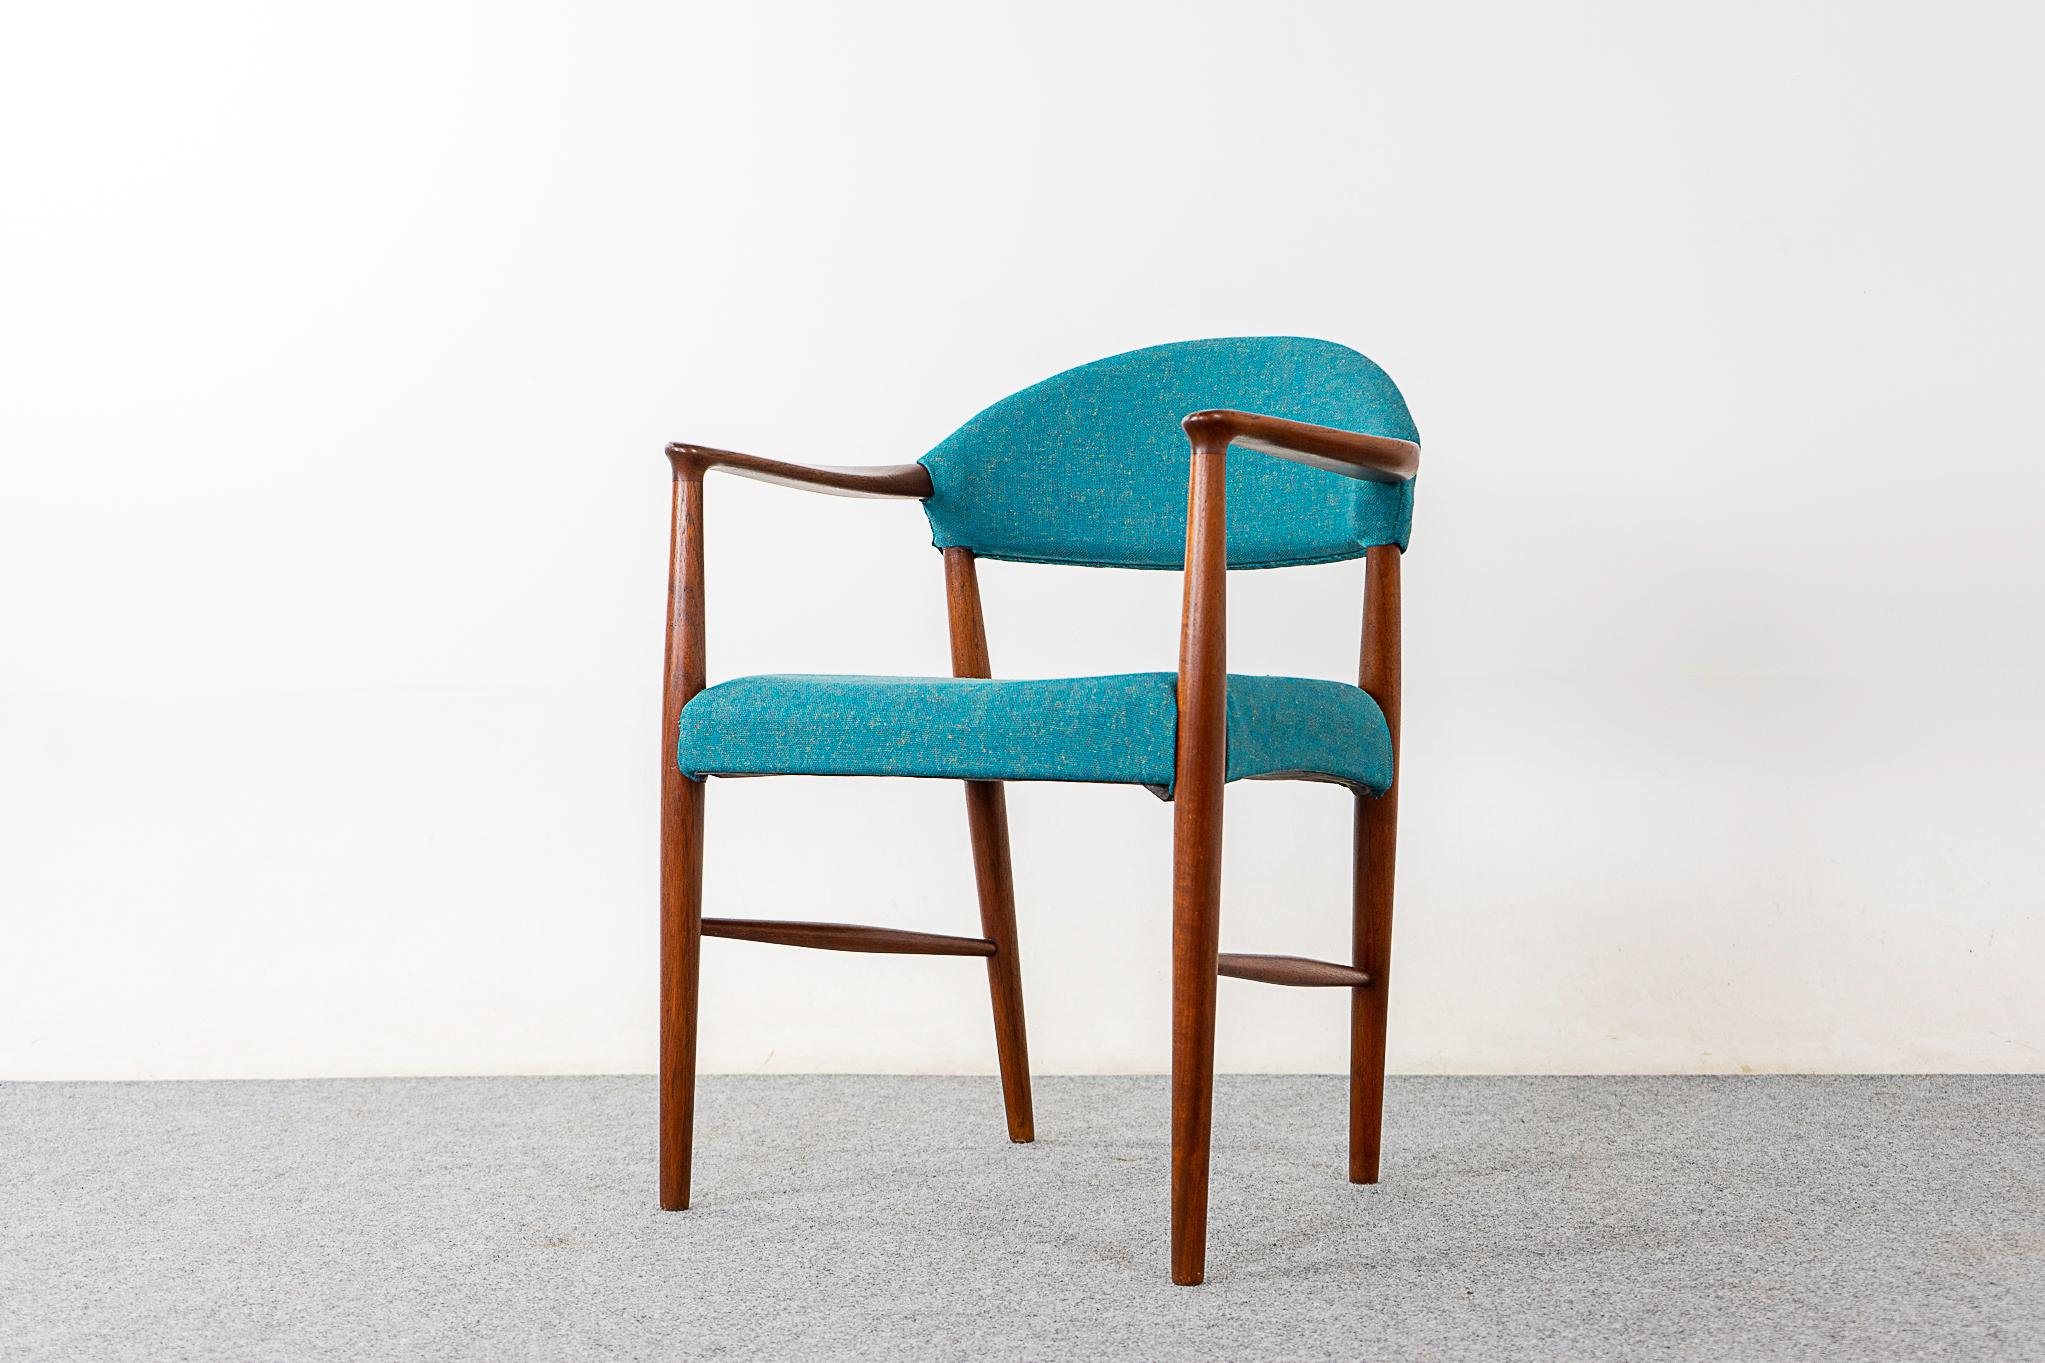 Teak Model 223 Danish arm chair by Kurt Olsen, circa 1960's. Sculptural solid wood frame with elegant details. Splayed tapering legs with spindle cross bars. Lovely teal upholstery in a blend of 70% pure new wool and 30% flax.